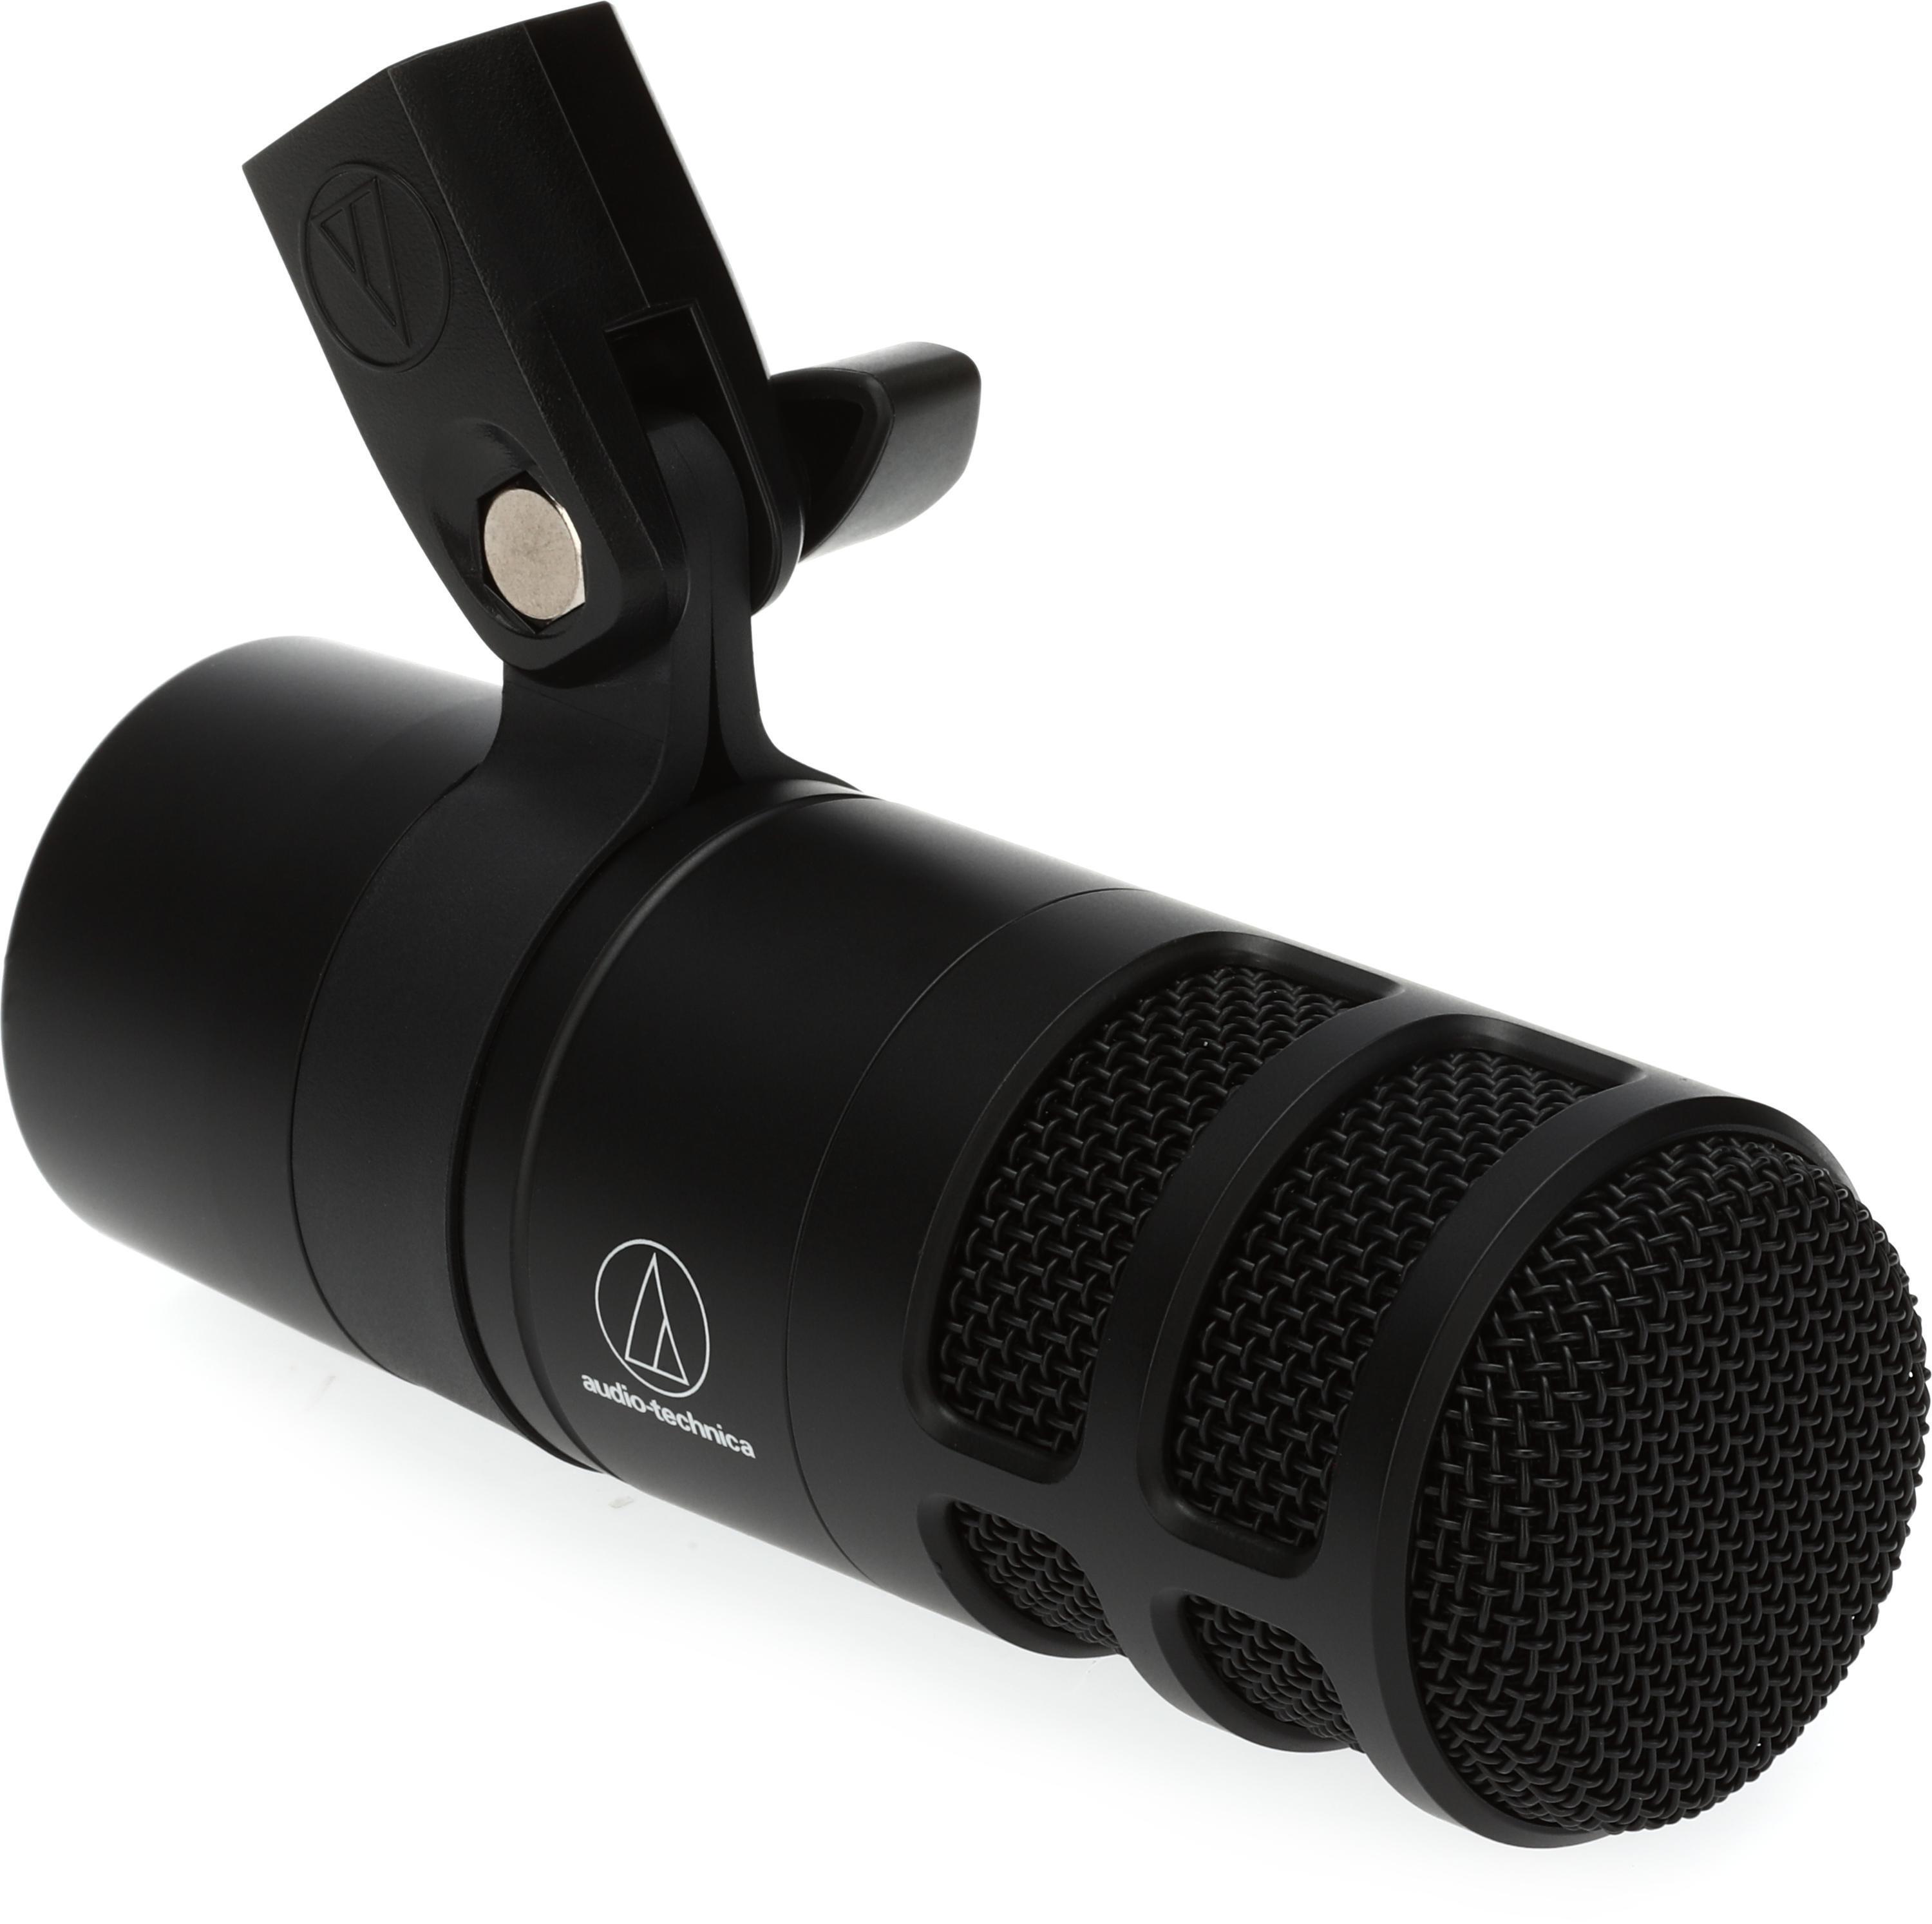 Bundled Item: Audio-Technica AT2040 Hypercardioid Dynamic Podcast Microphone